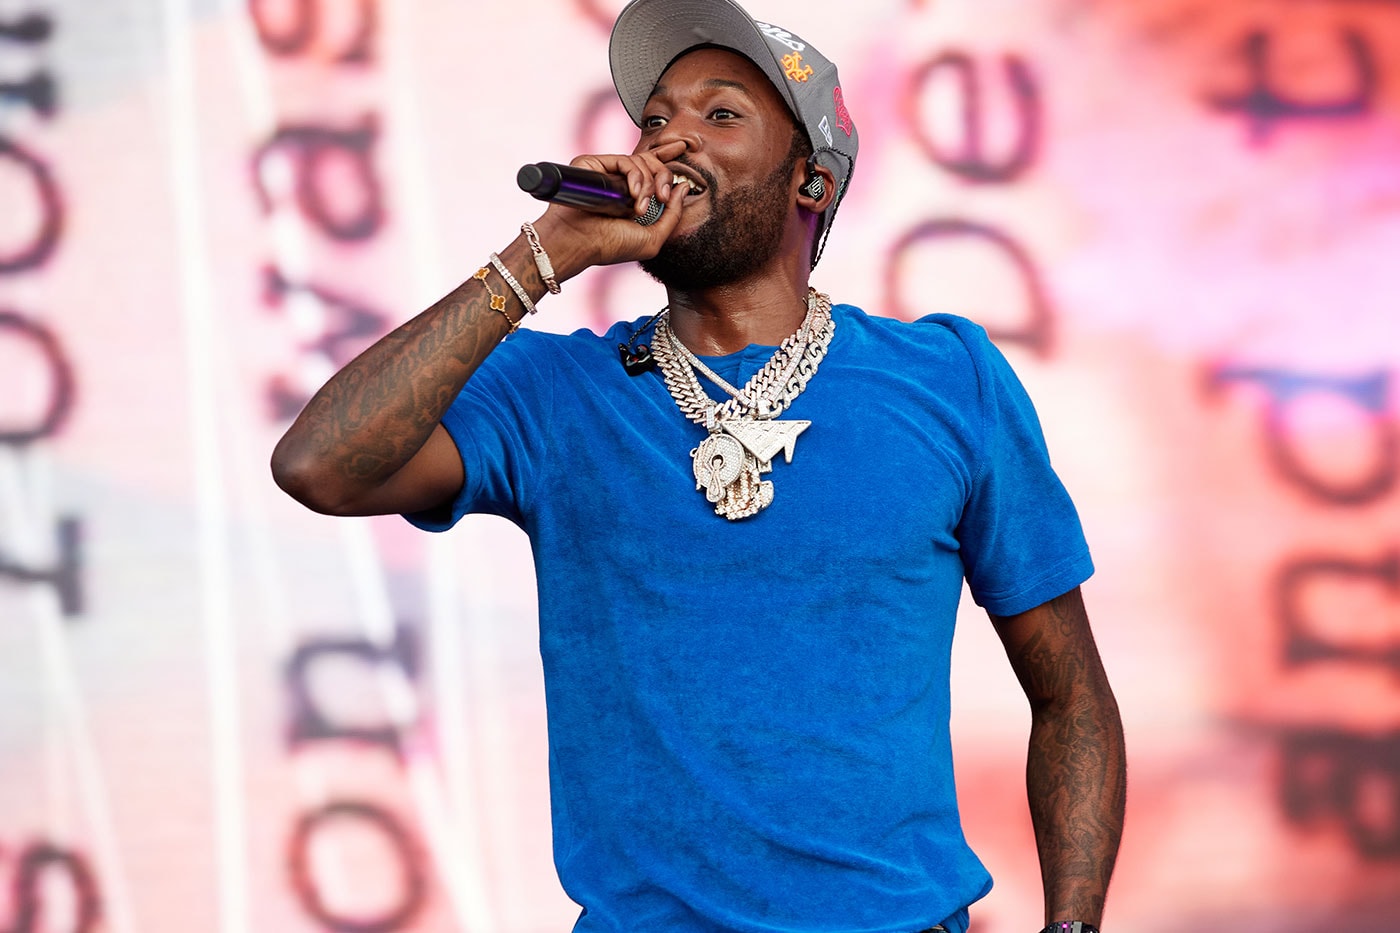 Meek Mill To Release 'Dreamchasers 5' Mixtape As NFT –